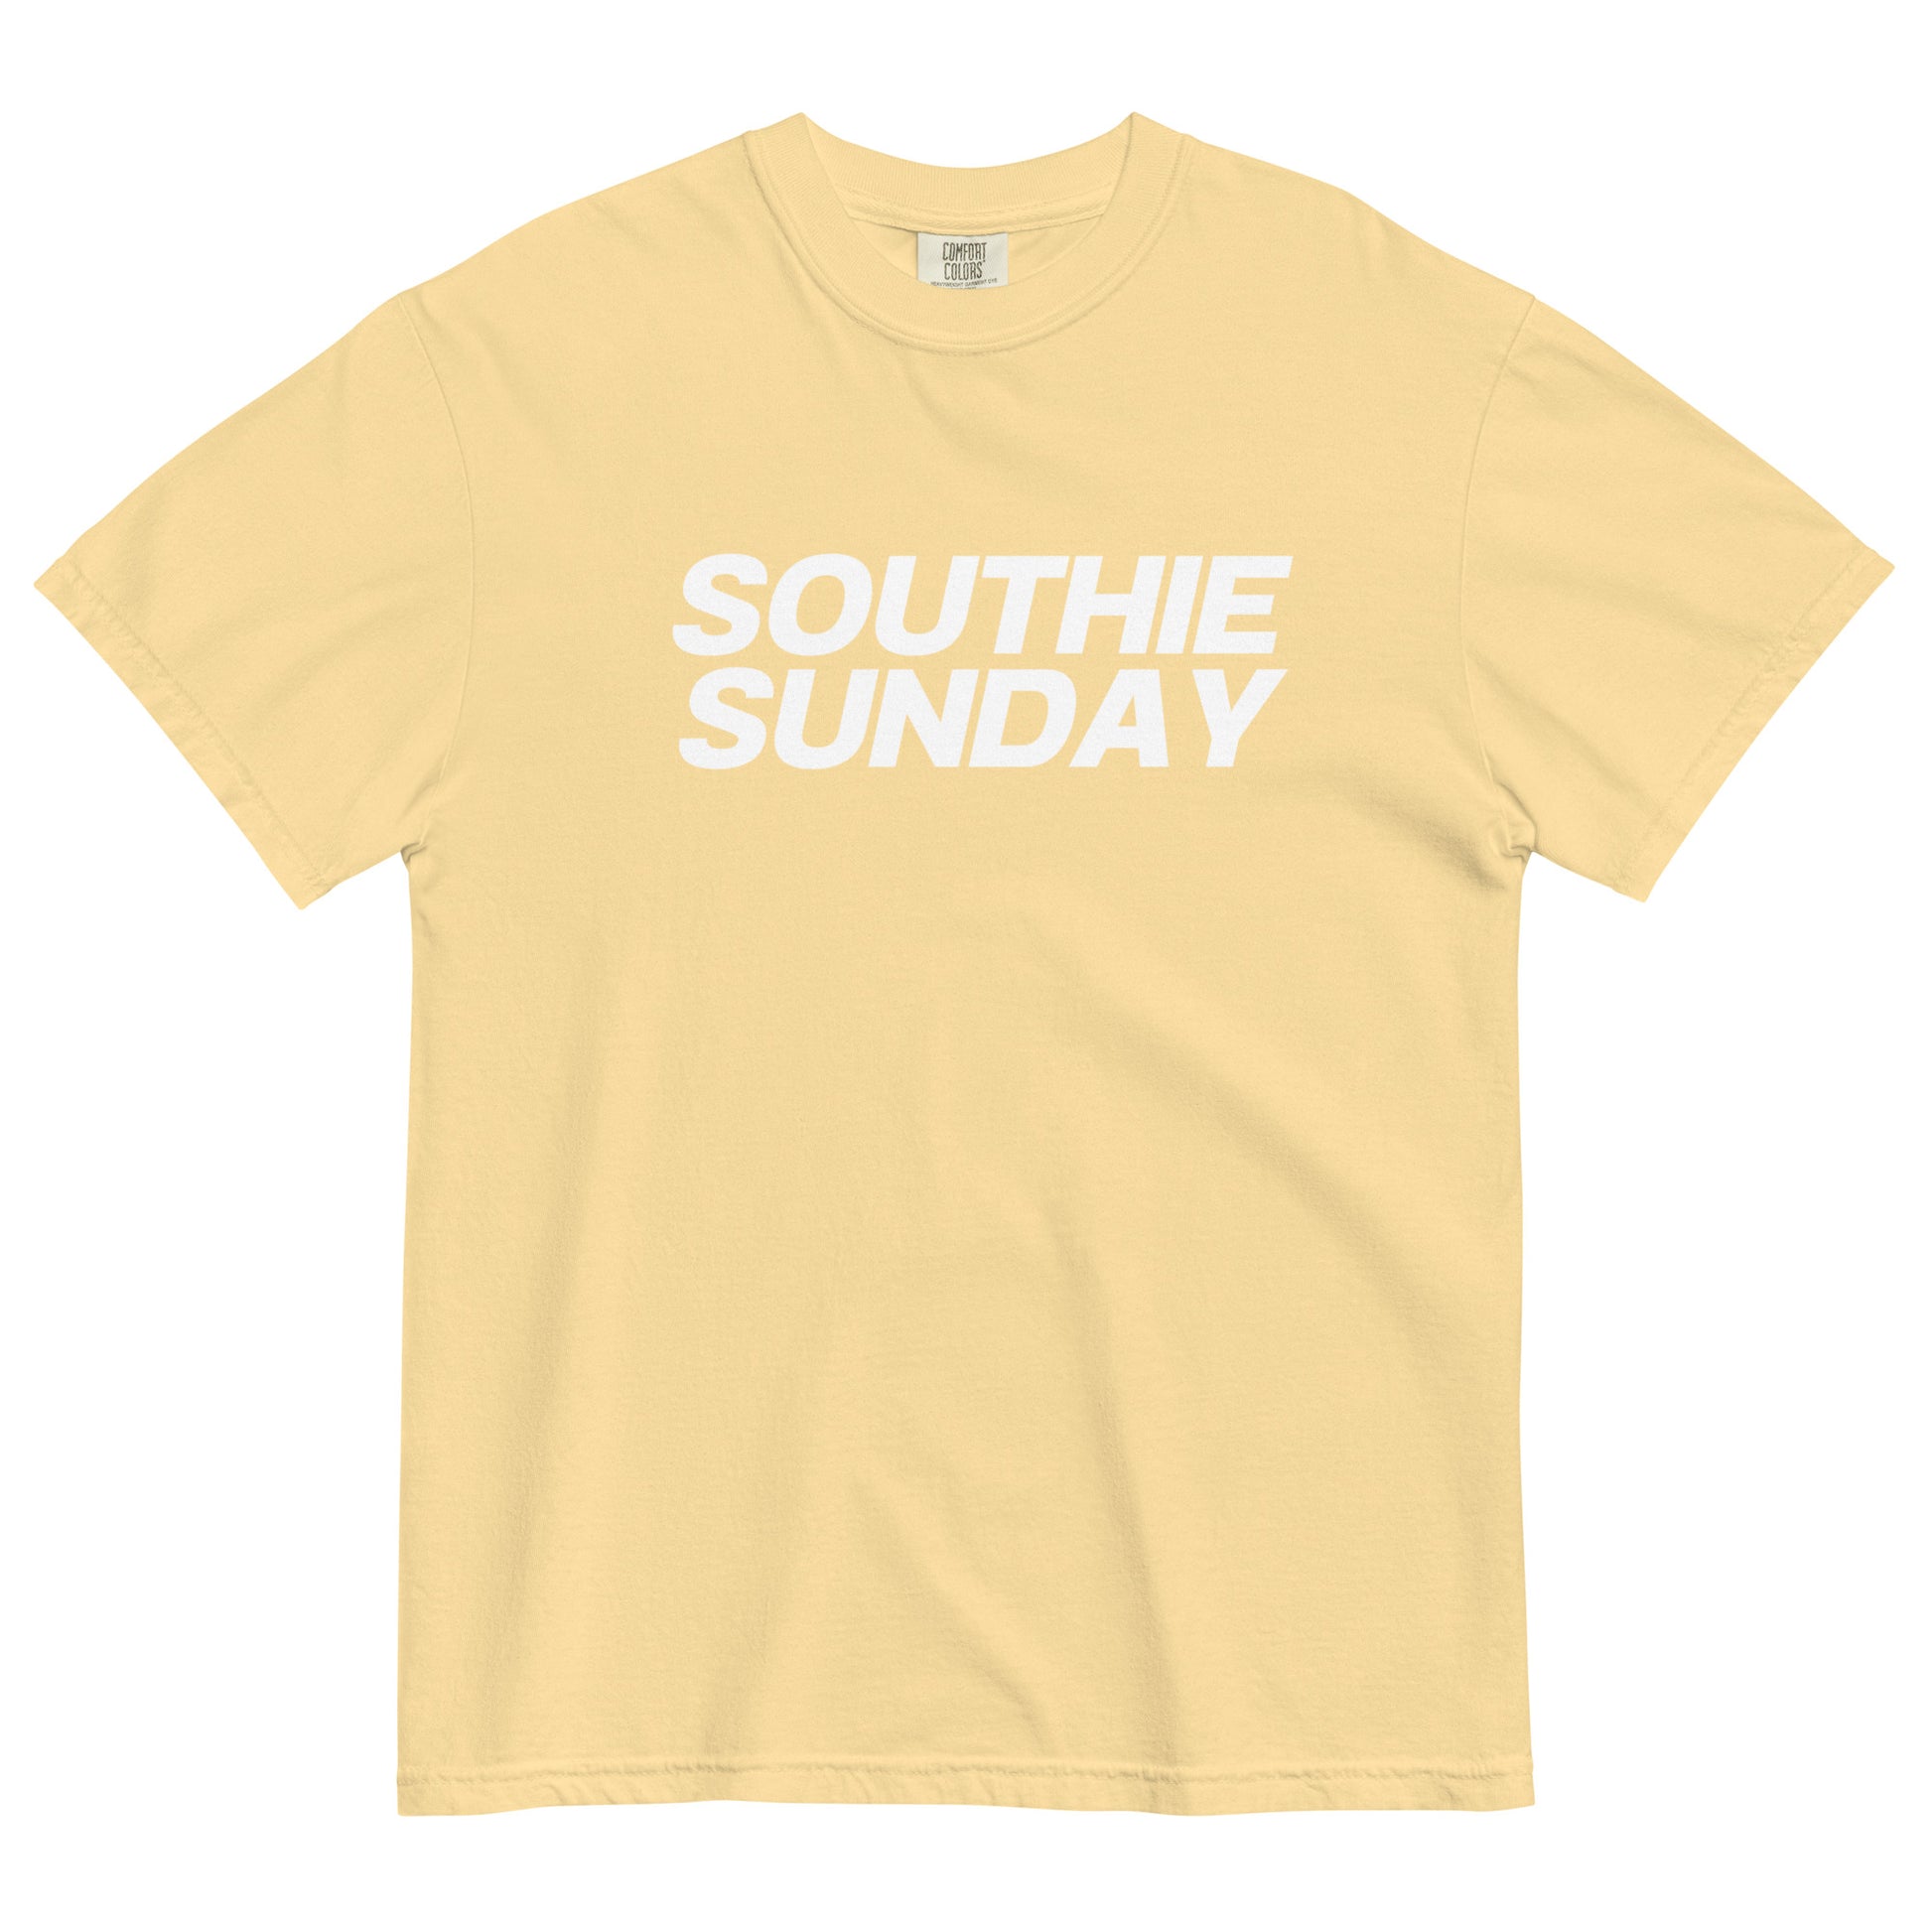 yellow tshirt that says "southie sunday" in white lettering